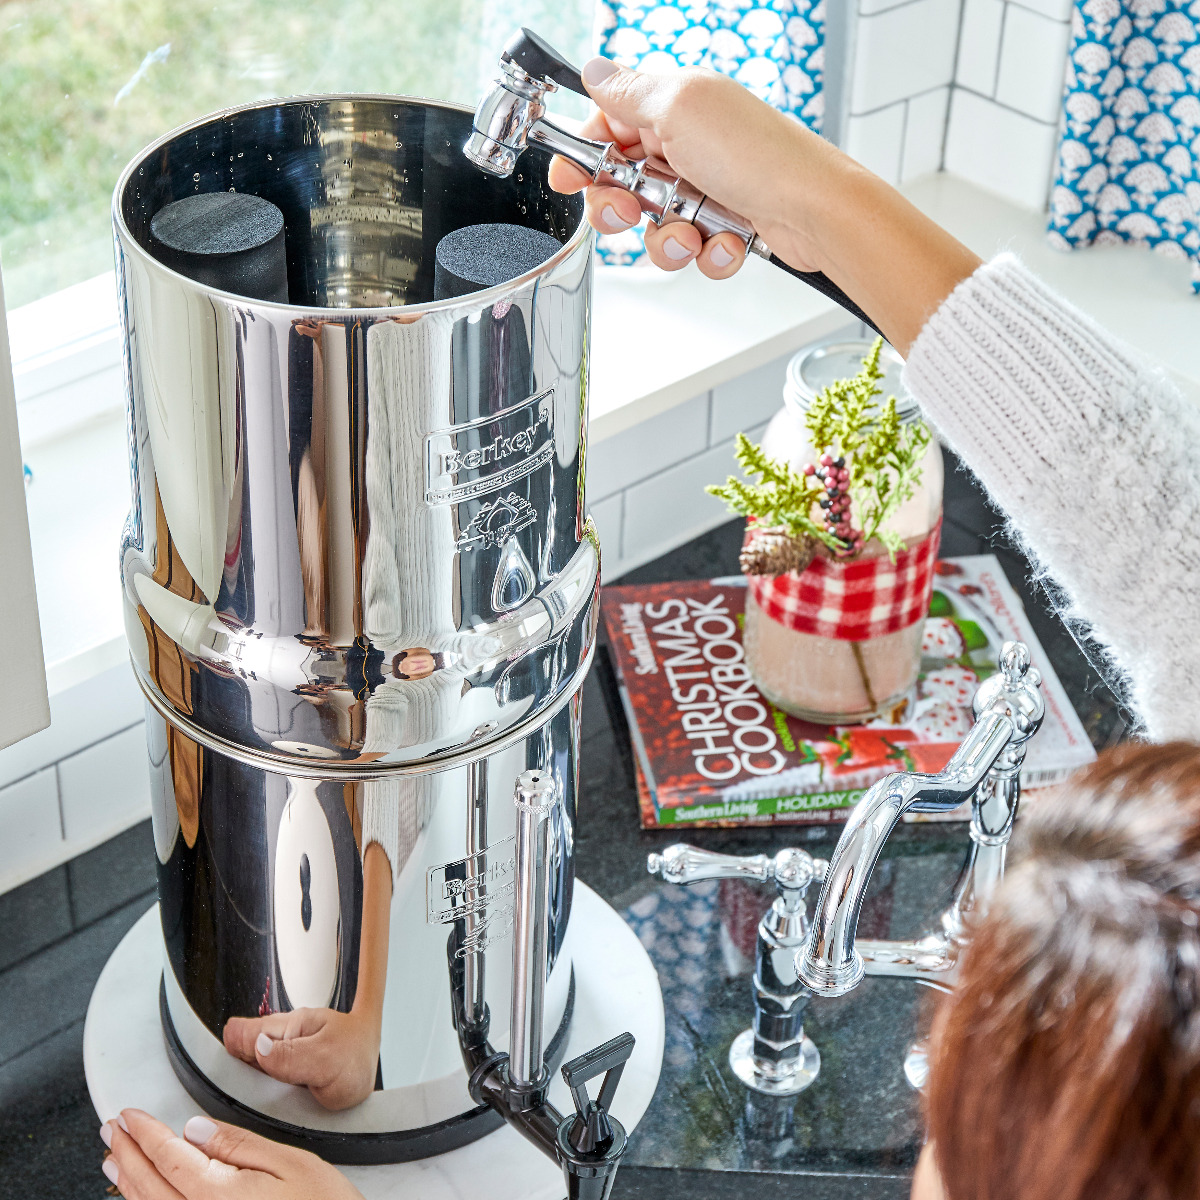 Berkey Water Filter: What It Is and Why I Bought One